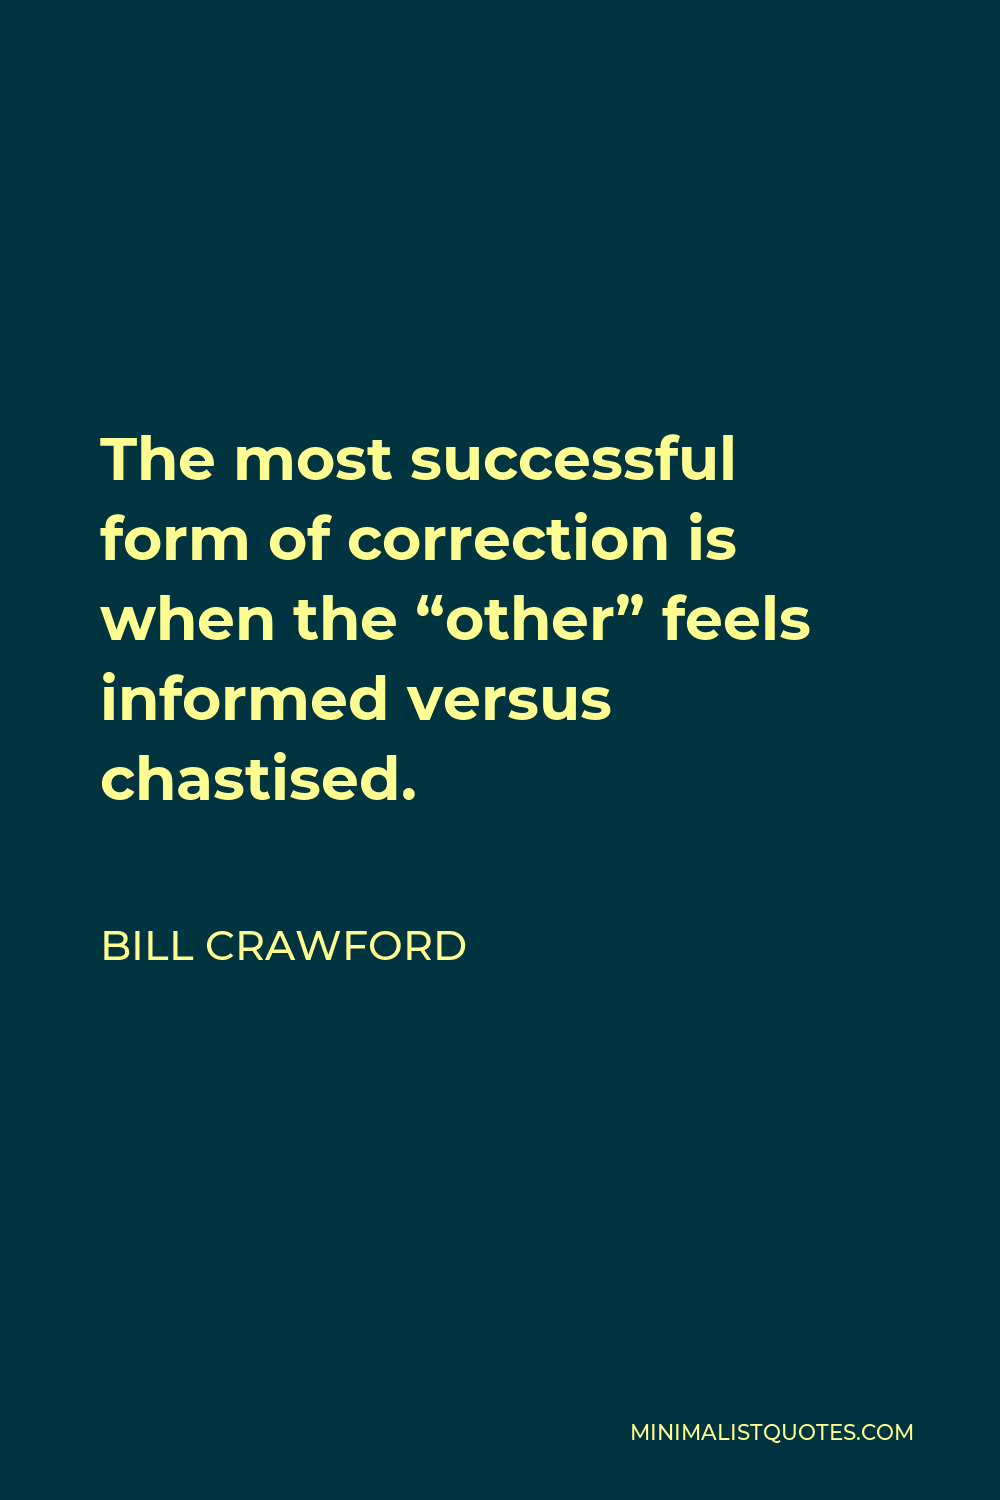 Bill Crawford Quote - The most successful form of correction is when the “other” feels informed versus chastised.